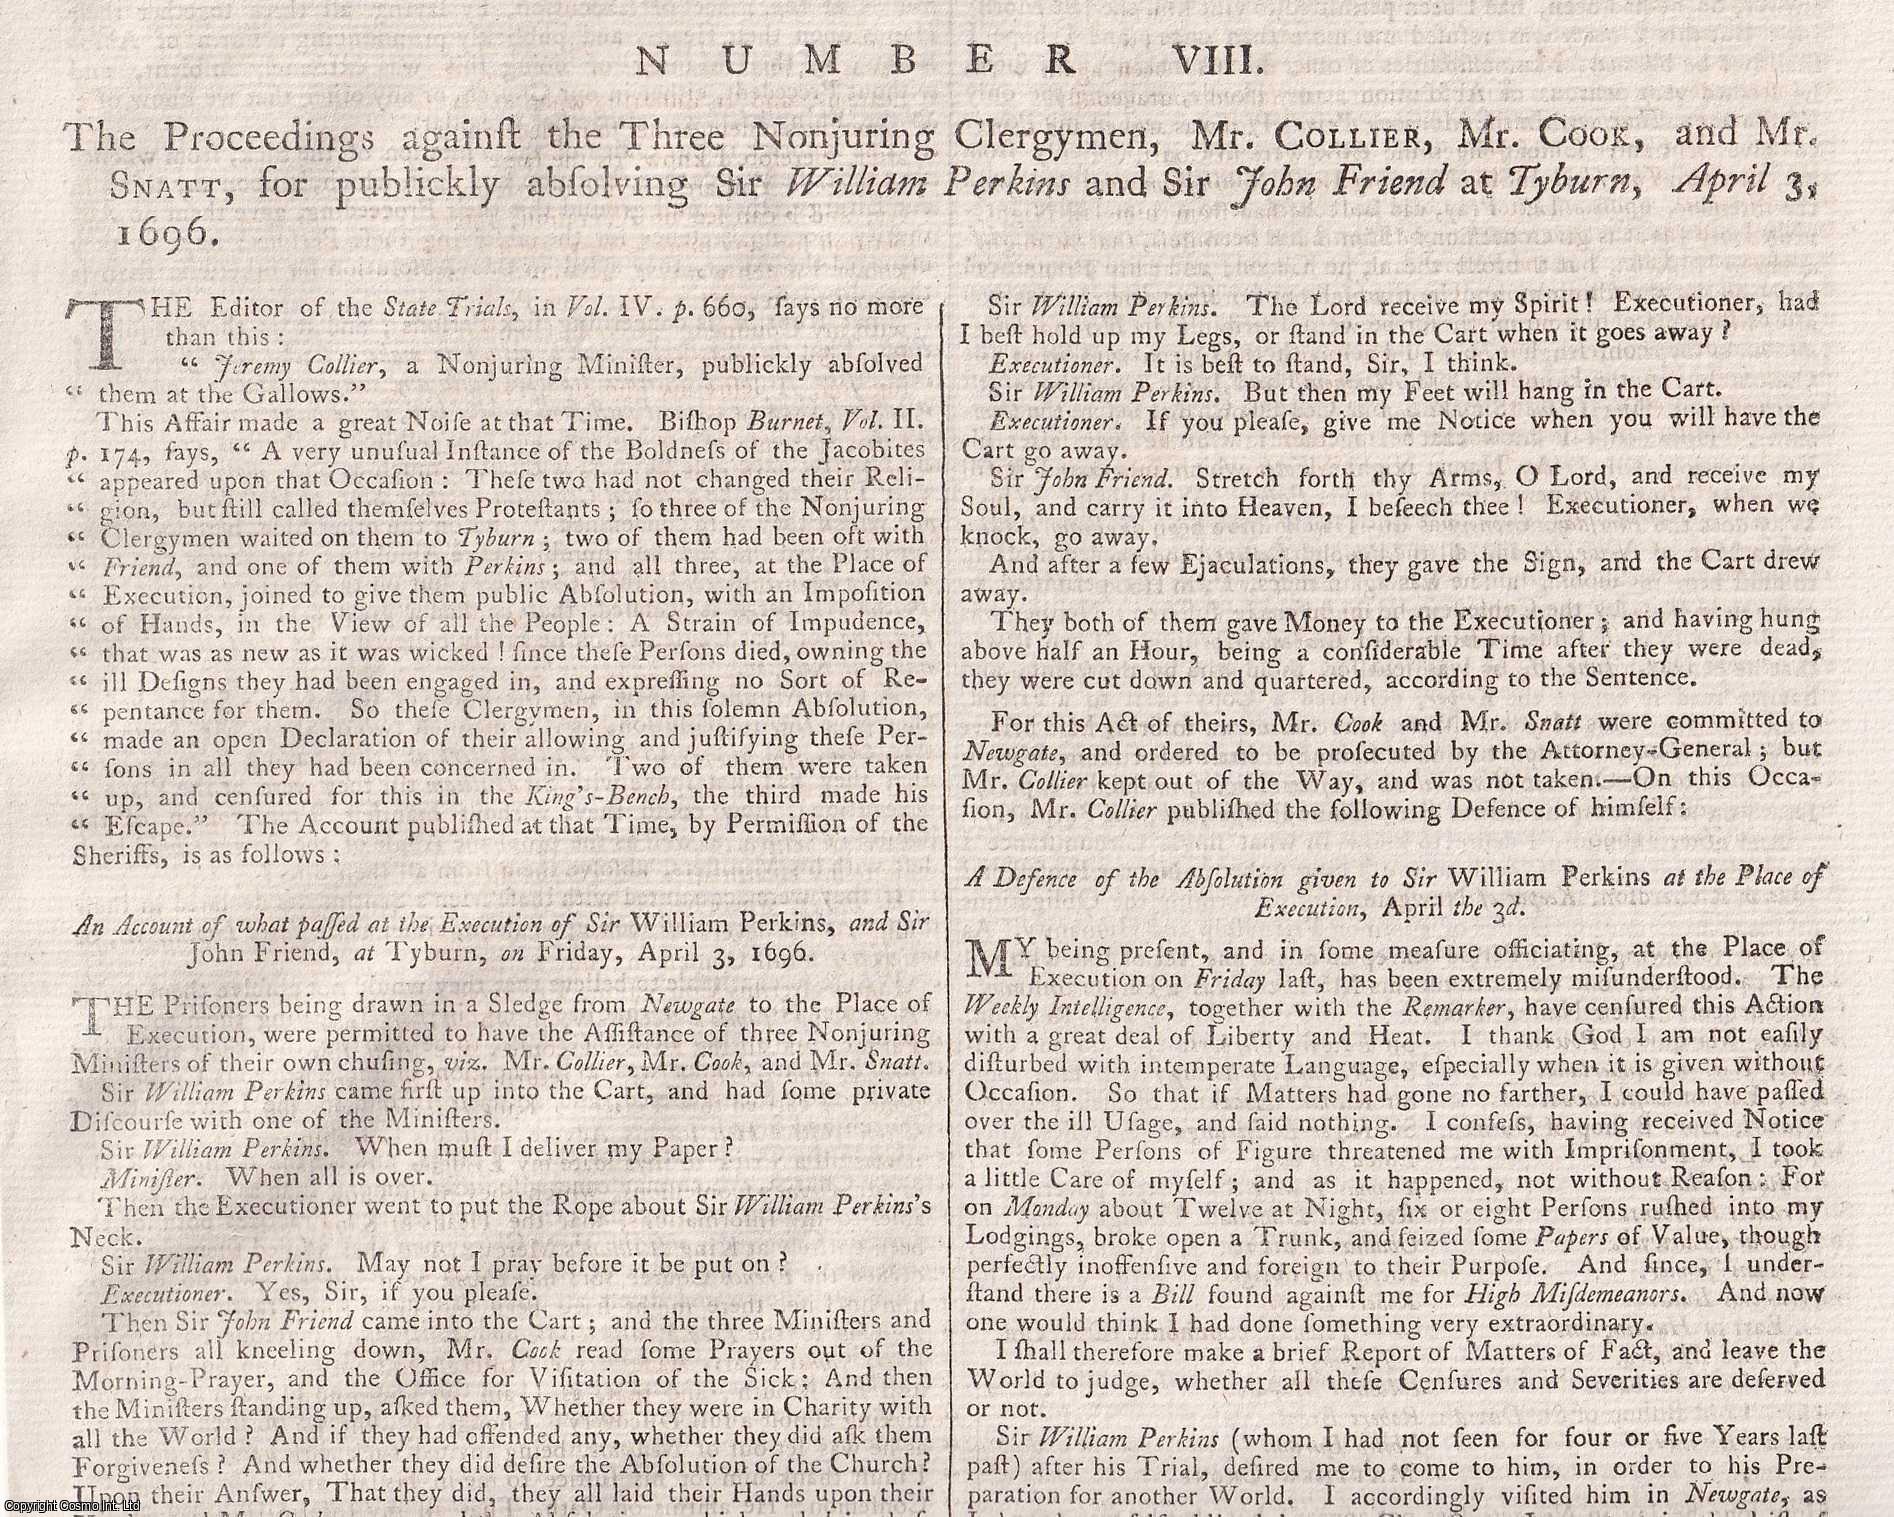 [Trial] - THE NONJURING SCHISM. The Proceedings against the Three Nonjuring Clergymen, Mr. Collier, Mr. Cook, and Mr. Snatt, for publickly absolving Sir William Perkins and Sir John Friend at Tyburn, April 3, 1696. An original article from the Collected State Trials.